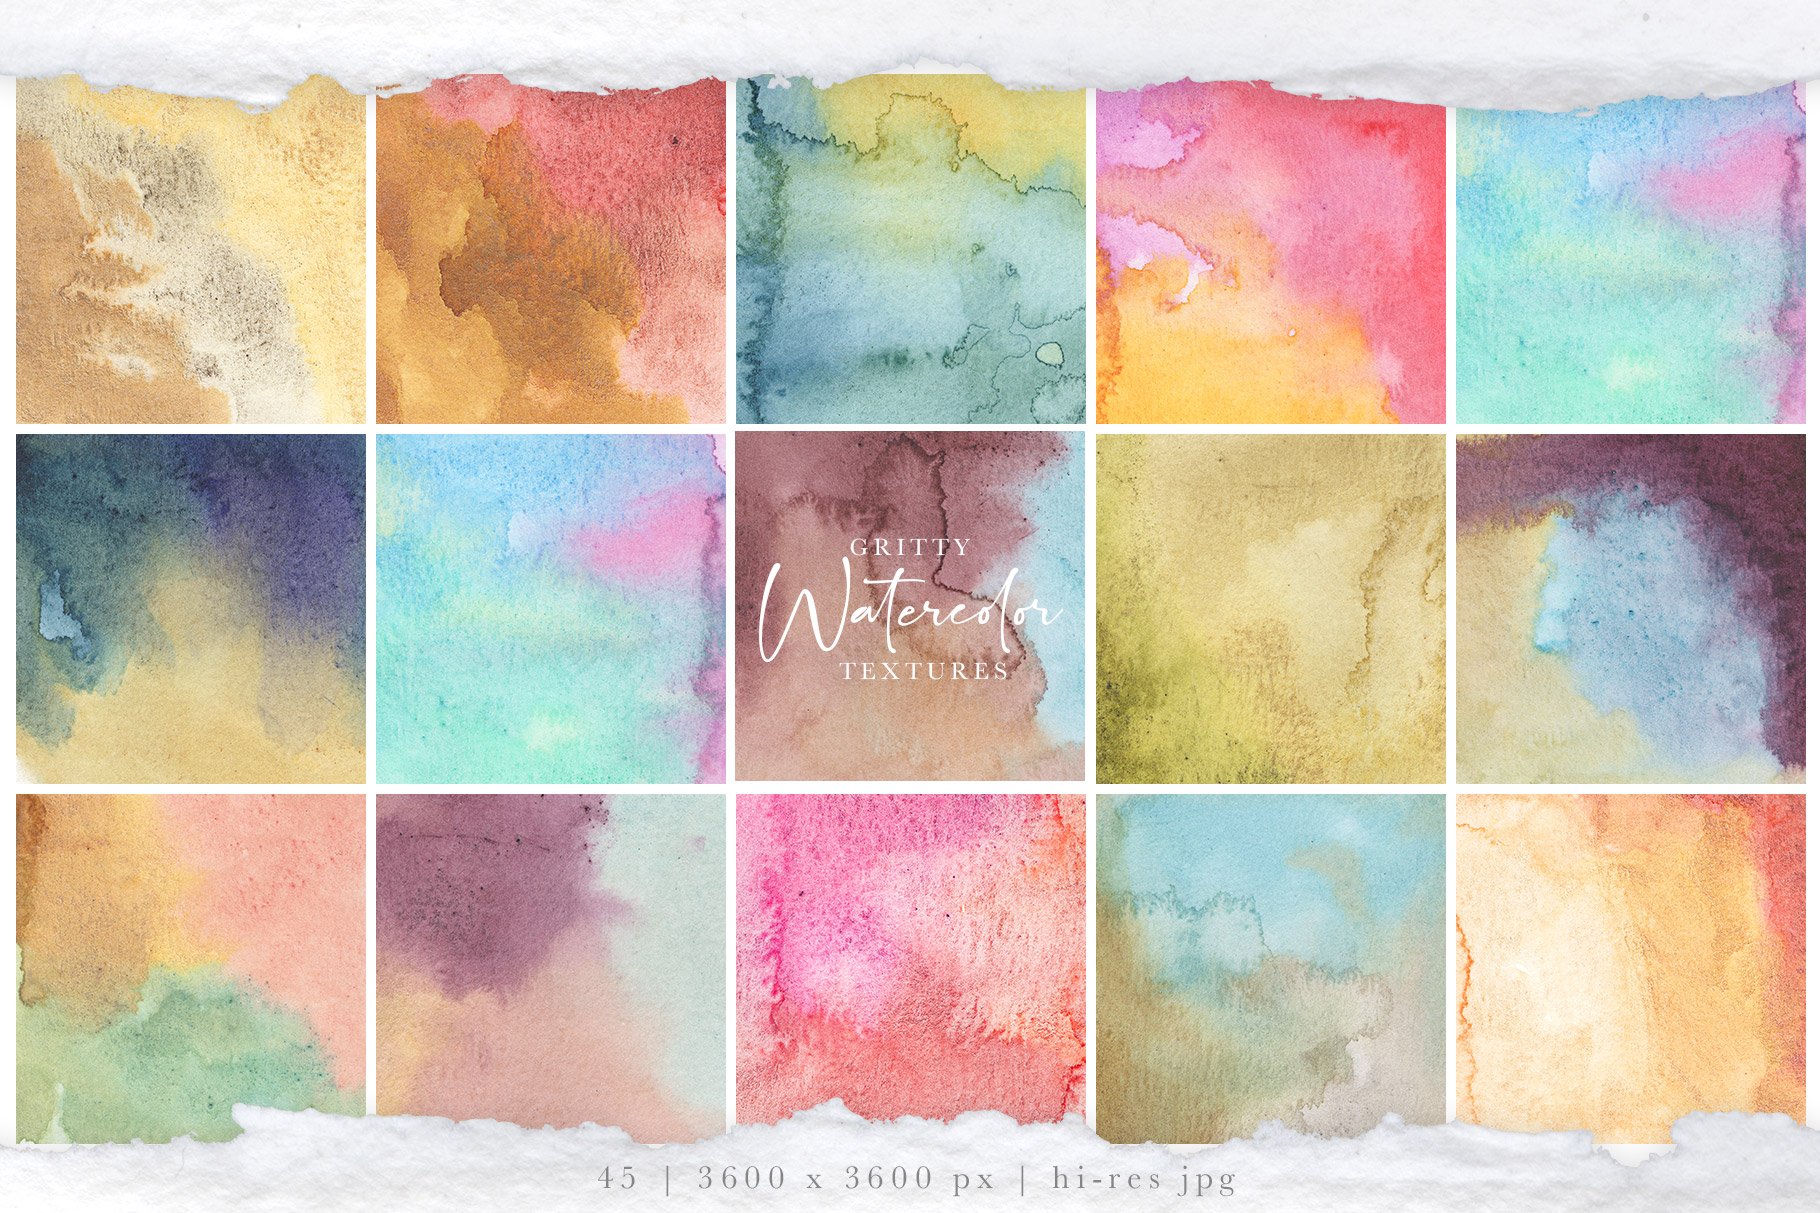 Gritty Watercolor Textures Vol 3 - Fairytale